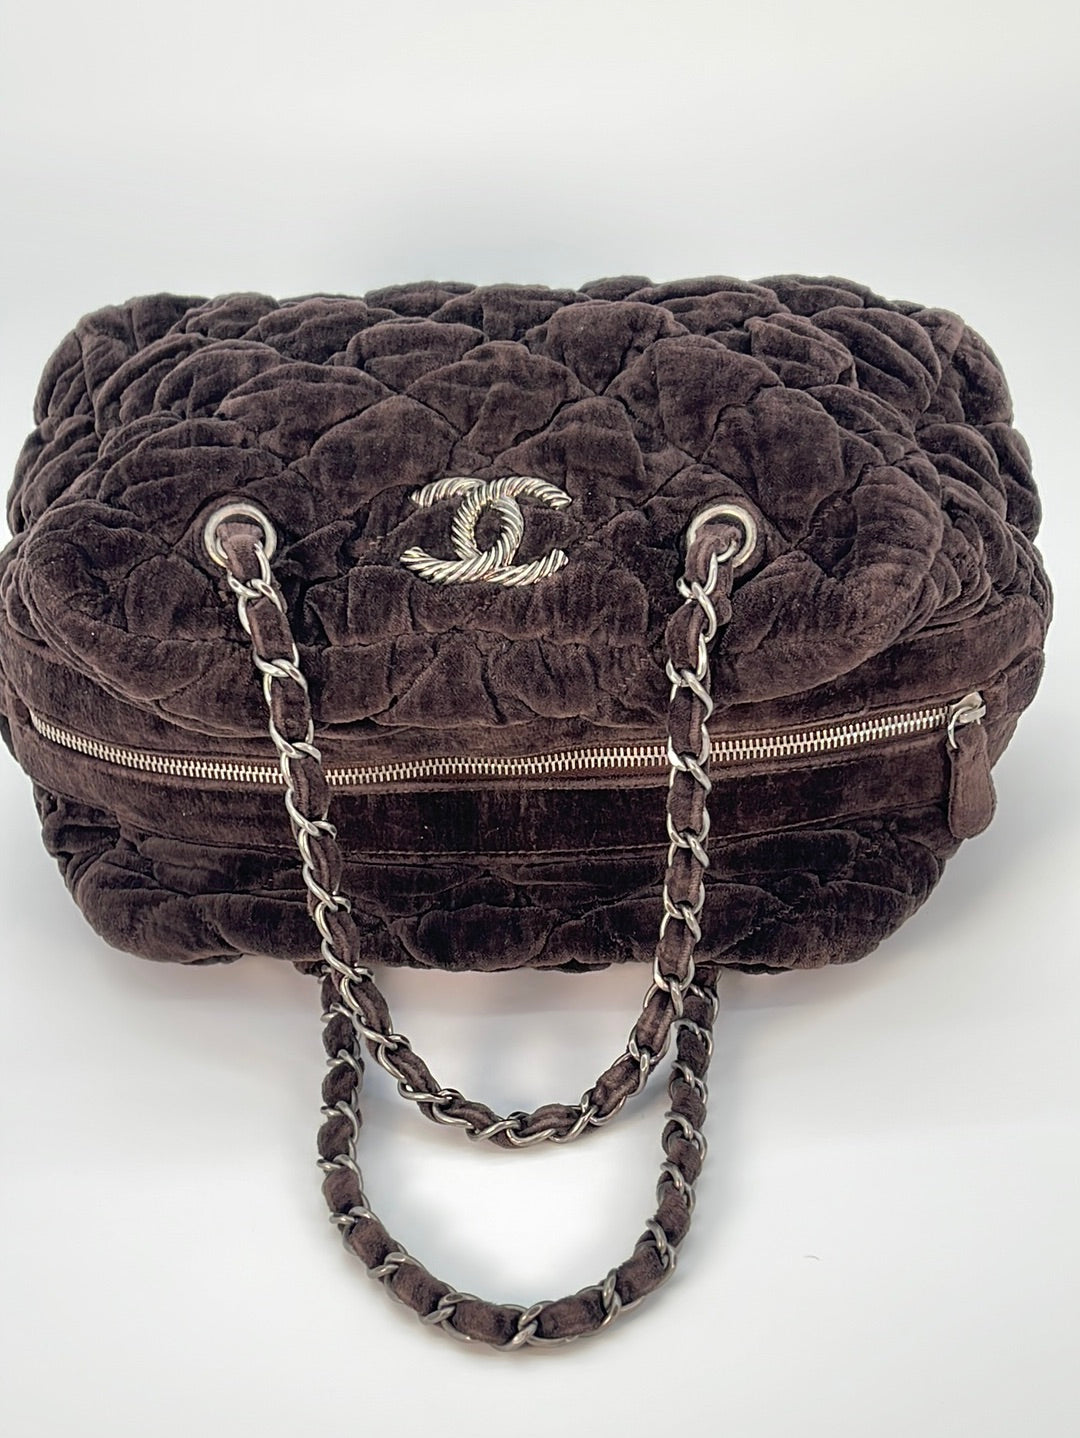 CHANEL, Bags, Authentic Preowned Chanel Small Fluffy Cc Bag